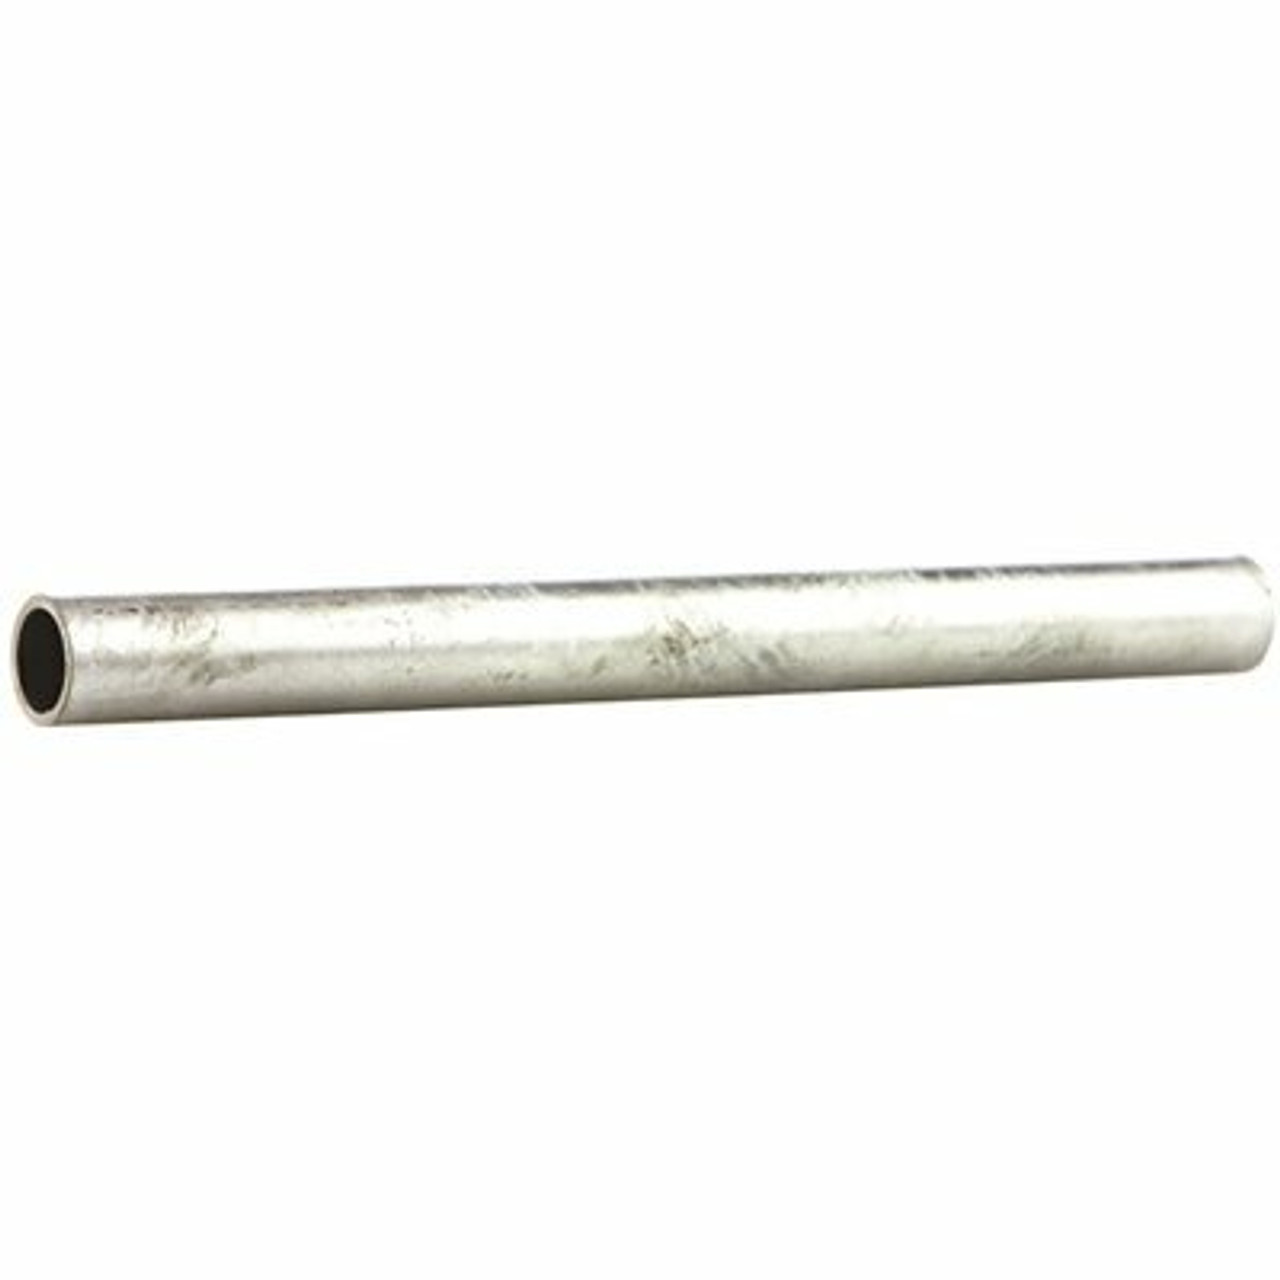 Southland 1 In. X 36 In. Galvanized Steel Pipe